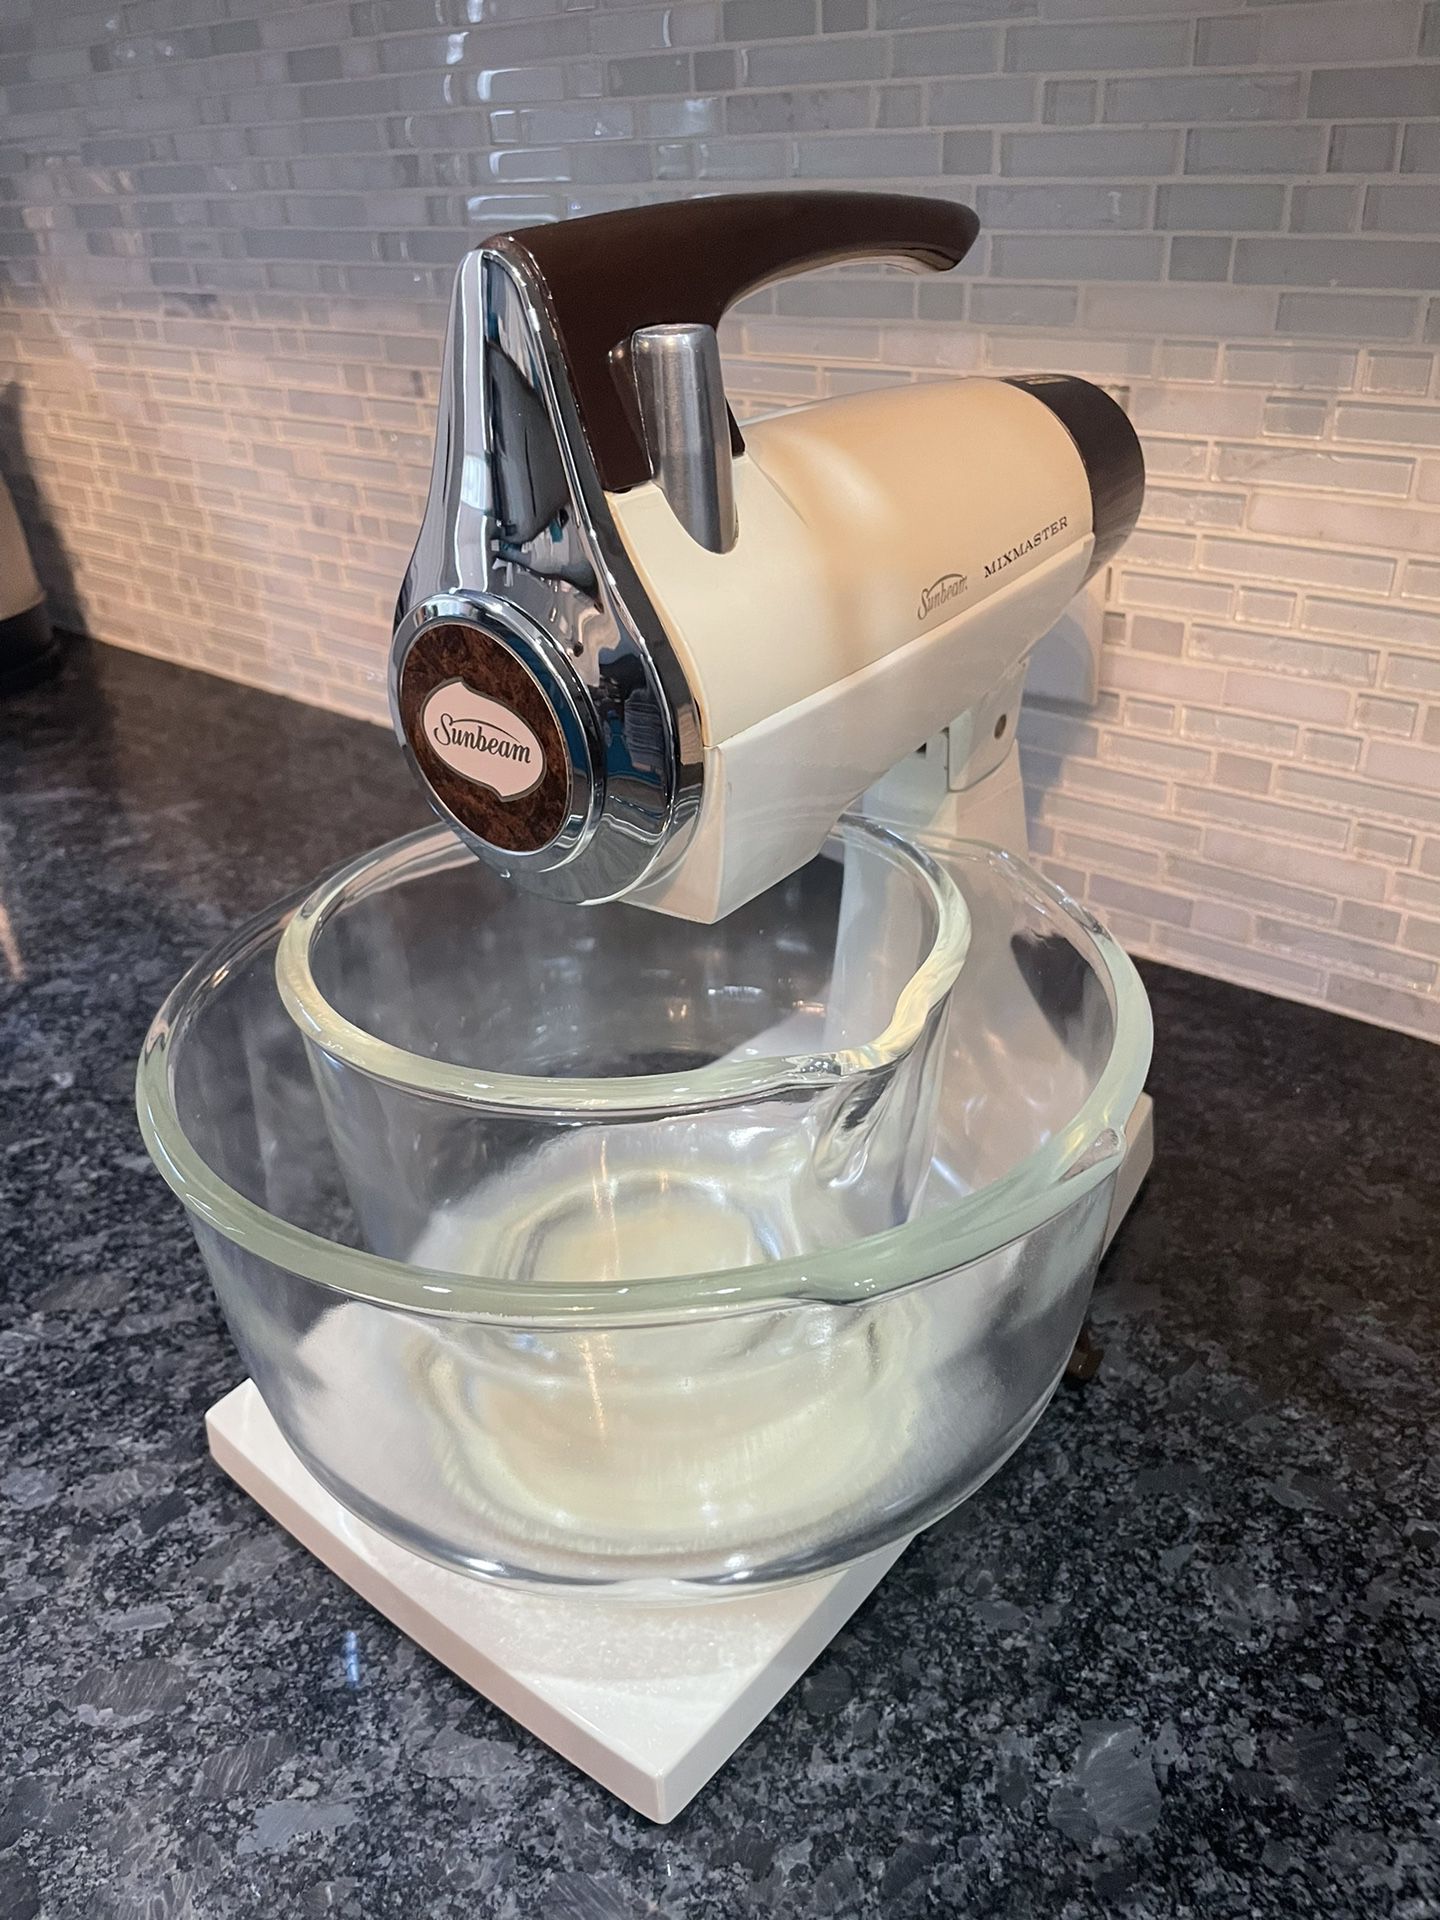 Vintage Sunbeam Mixmaster Mixer 12 Mixing Speeds White Fireking Bowls Works  for Sale in Pittsburgh, PA - OfferUp